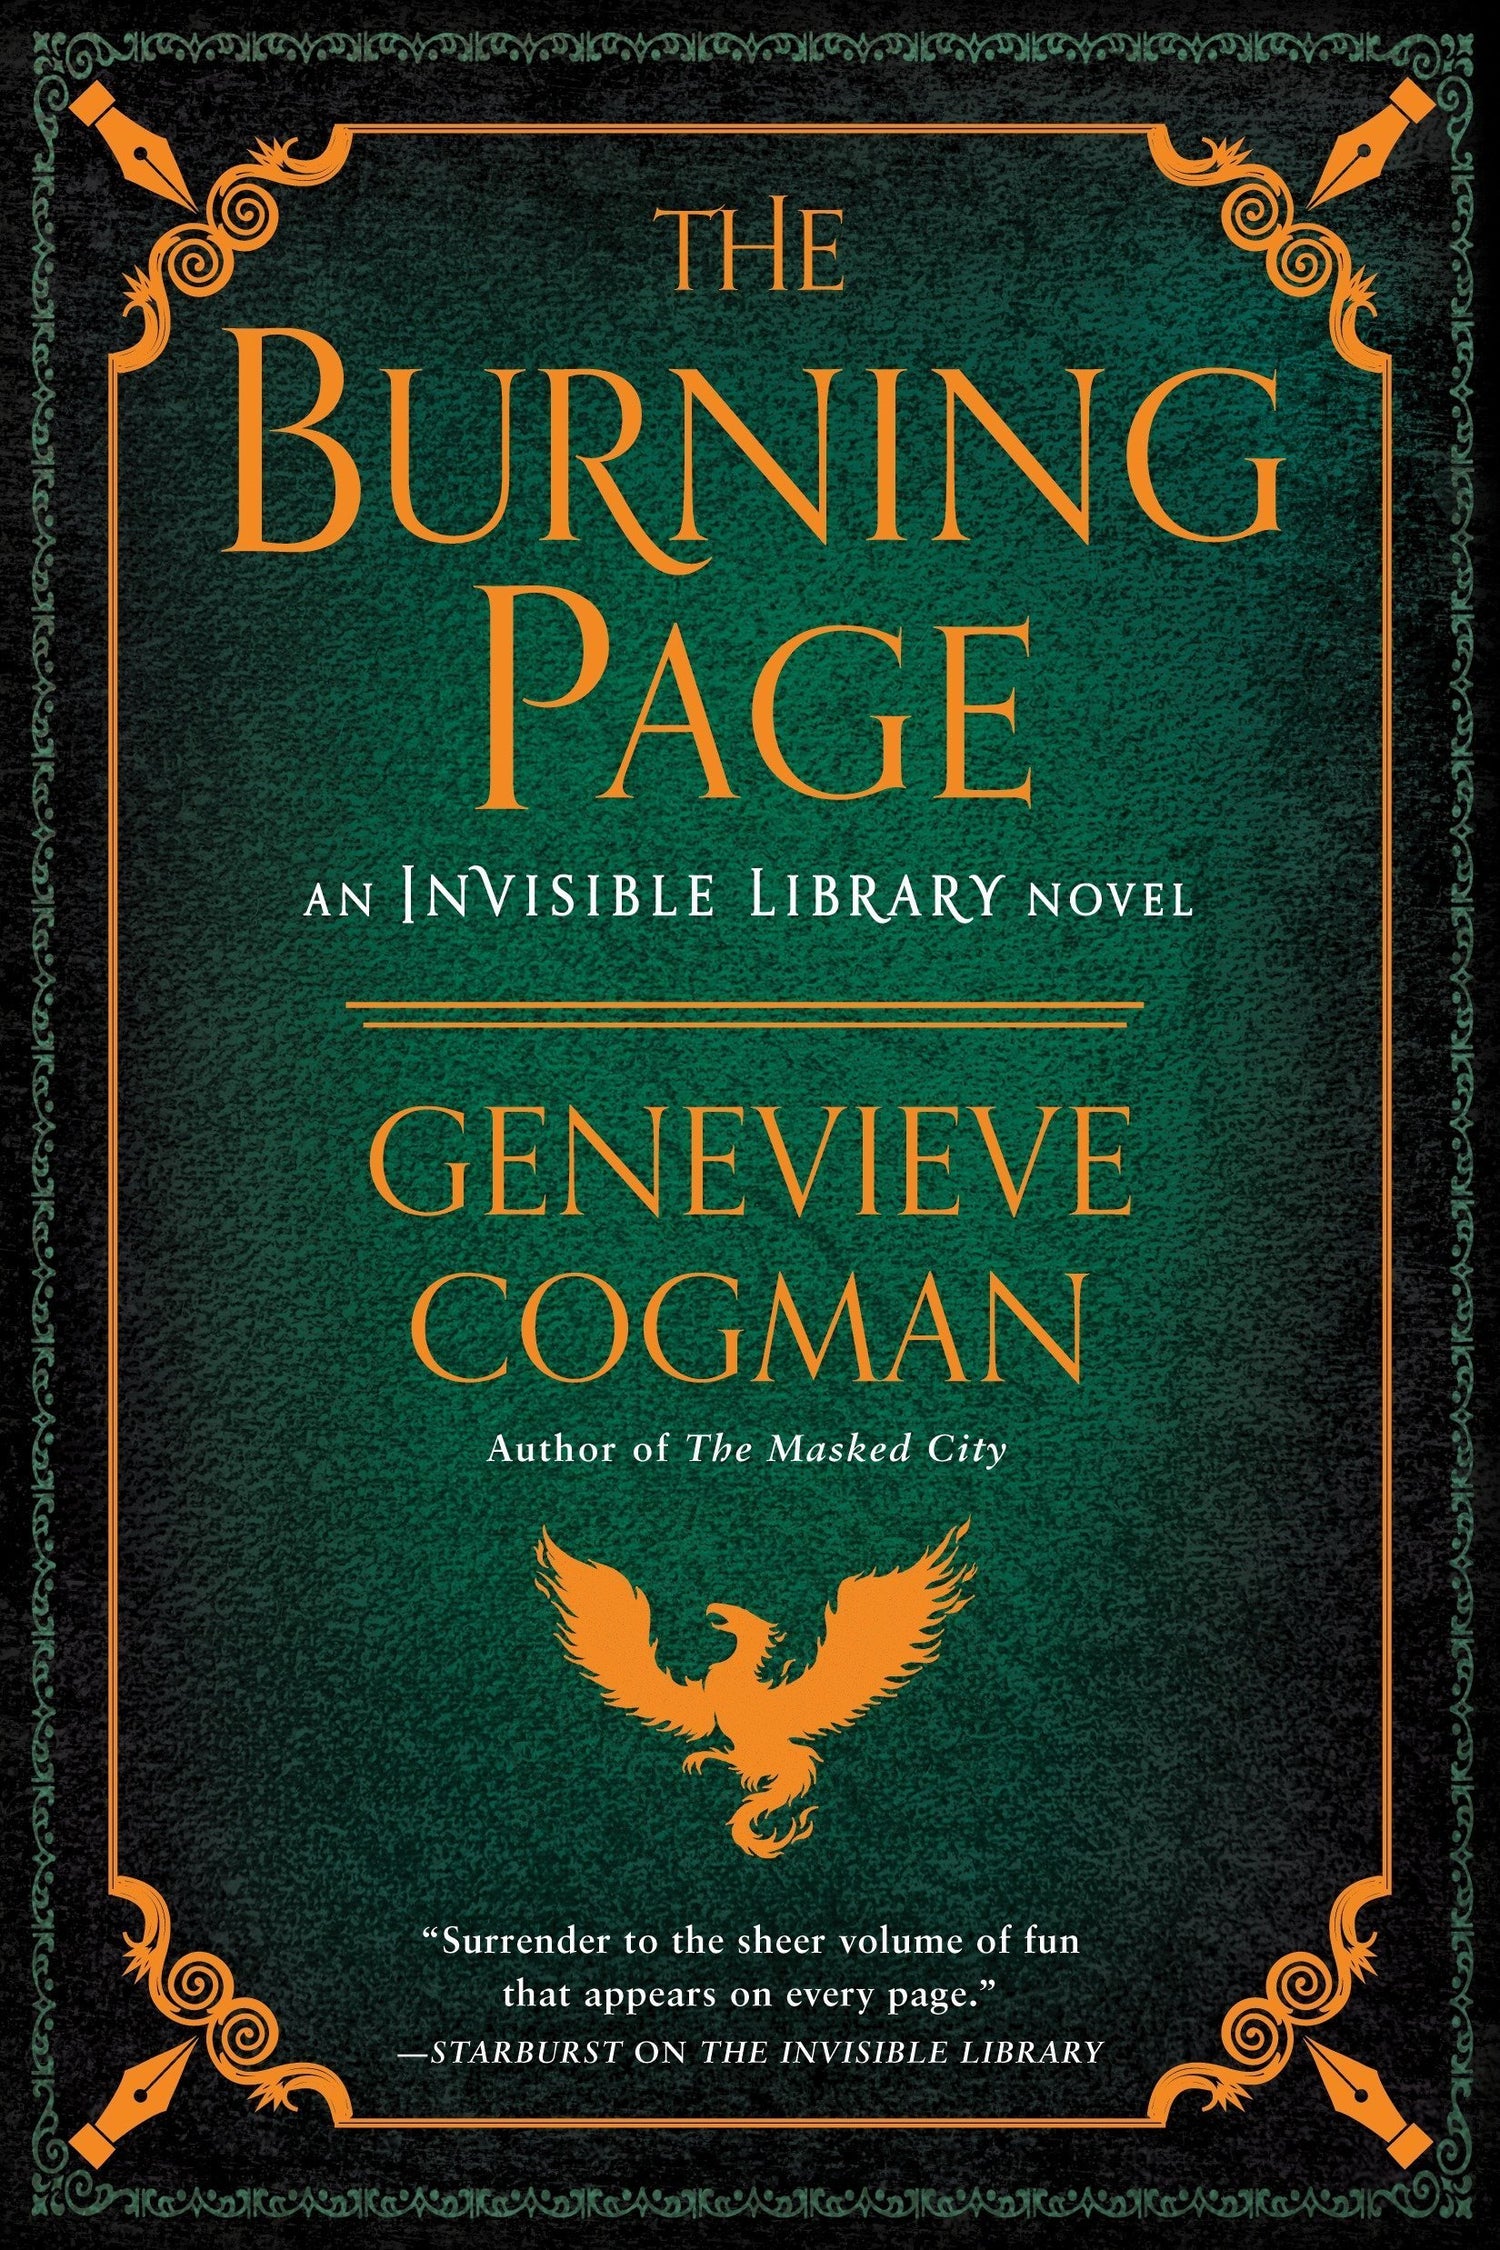 The Burning Page (The Invisible Library Novel) - D'Autores